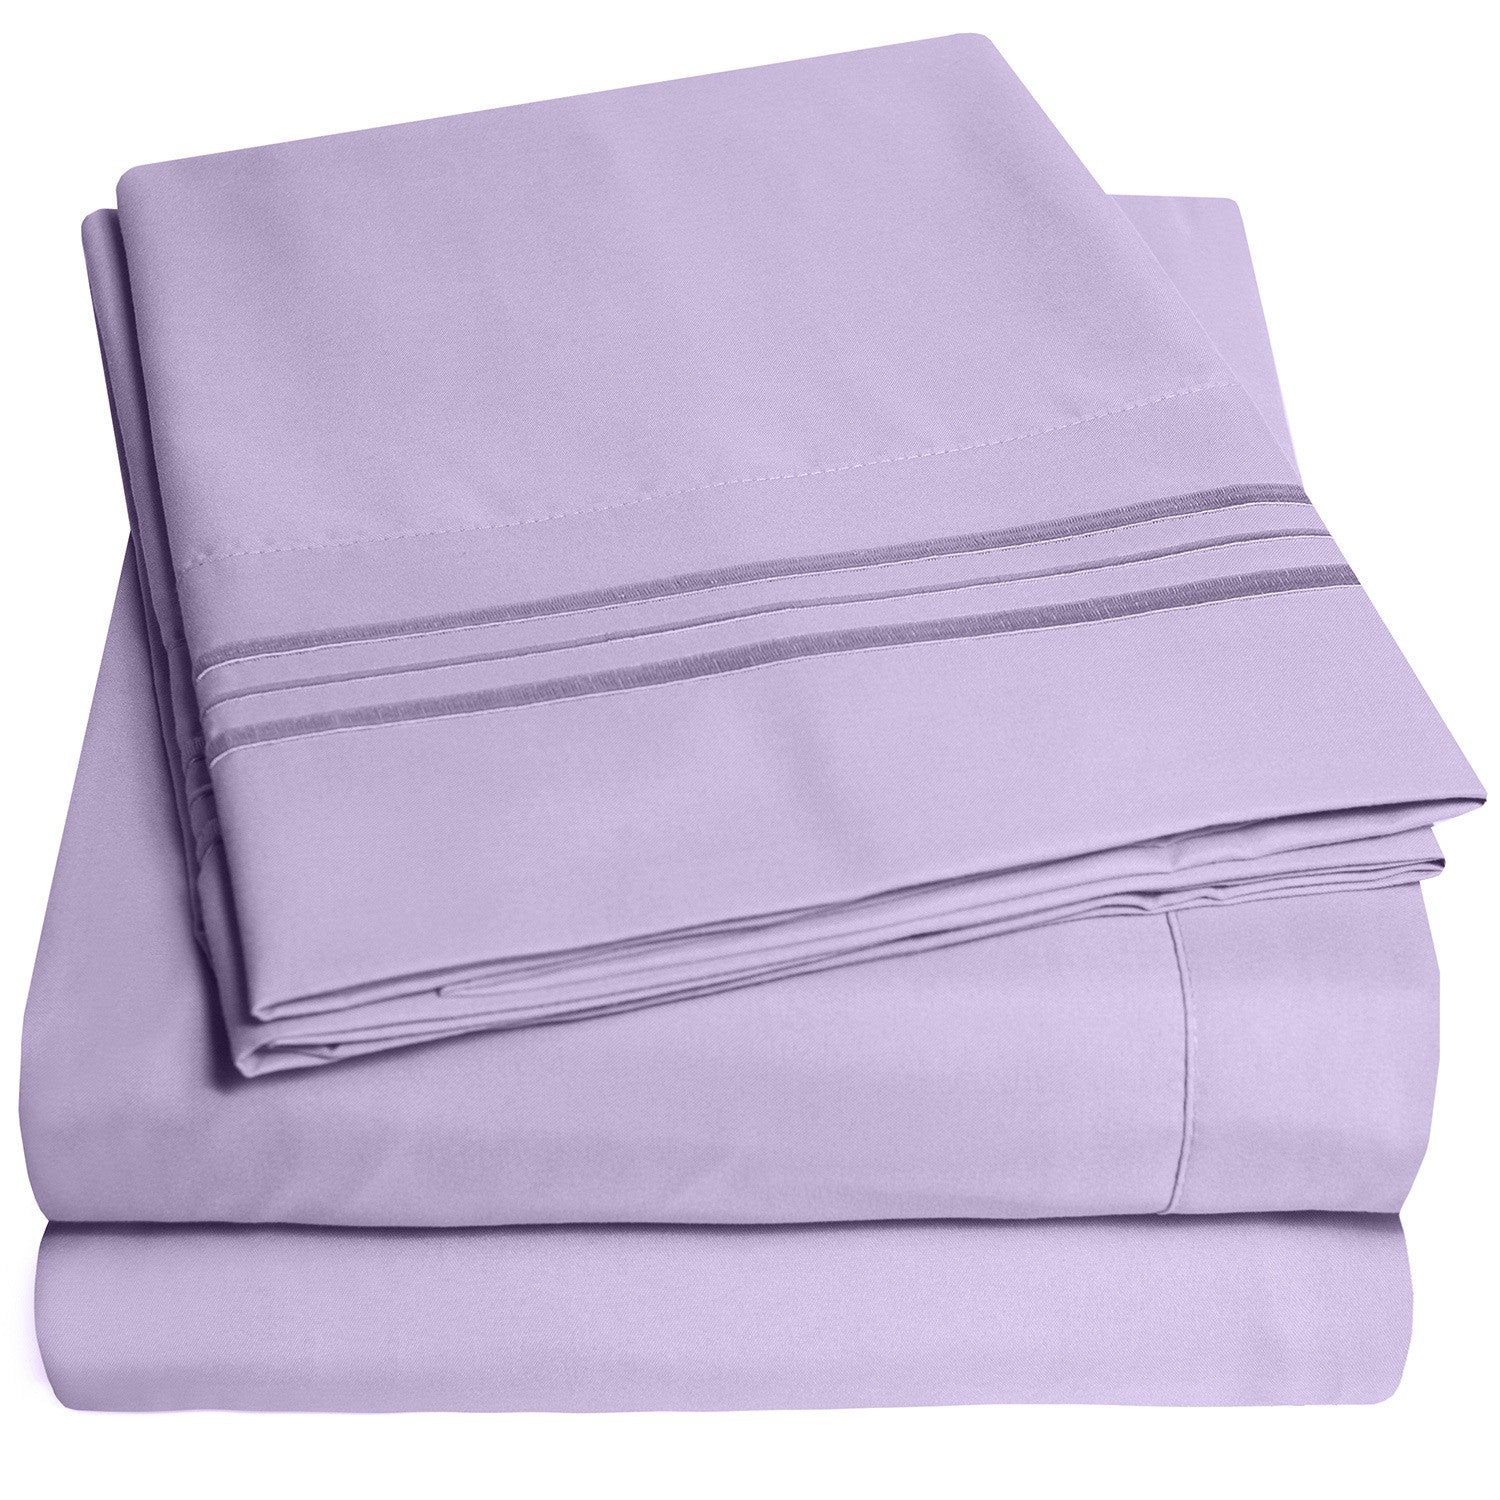 Classic 4-Piece Bed Sheet Set (Lavender) - Folded